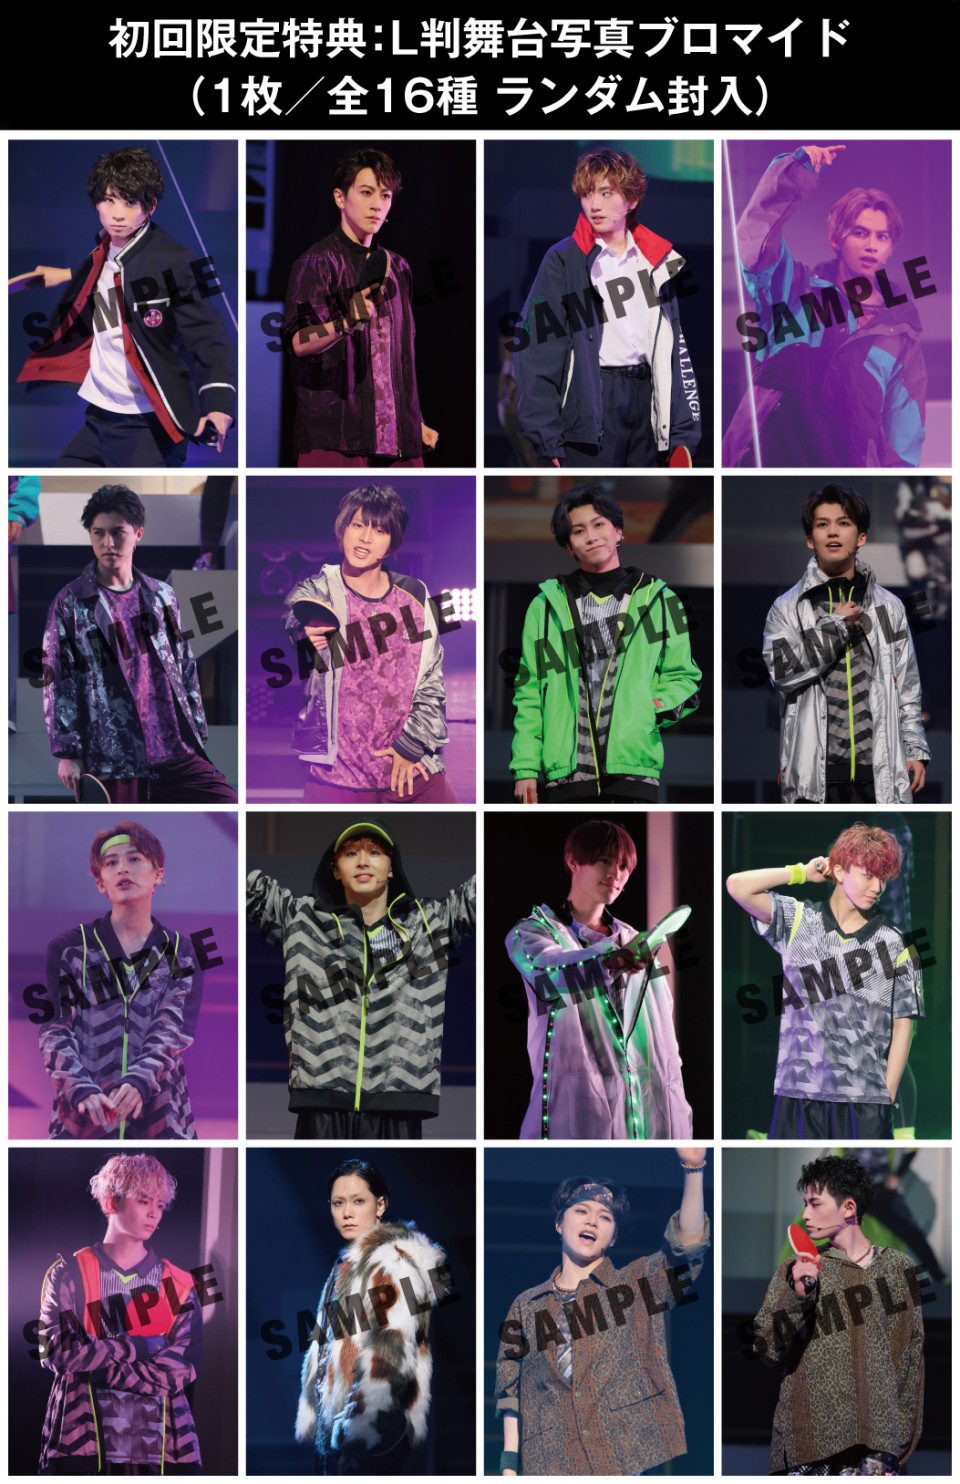 FAKE MOTION -THE SUPER STAGE-」 Blu-ray＆DVD 各法人限定特 